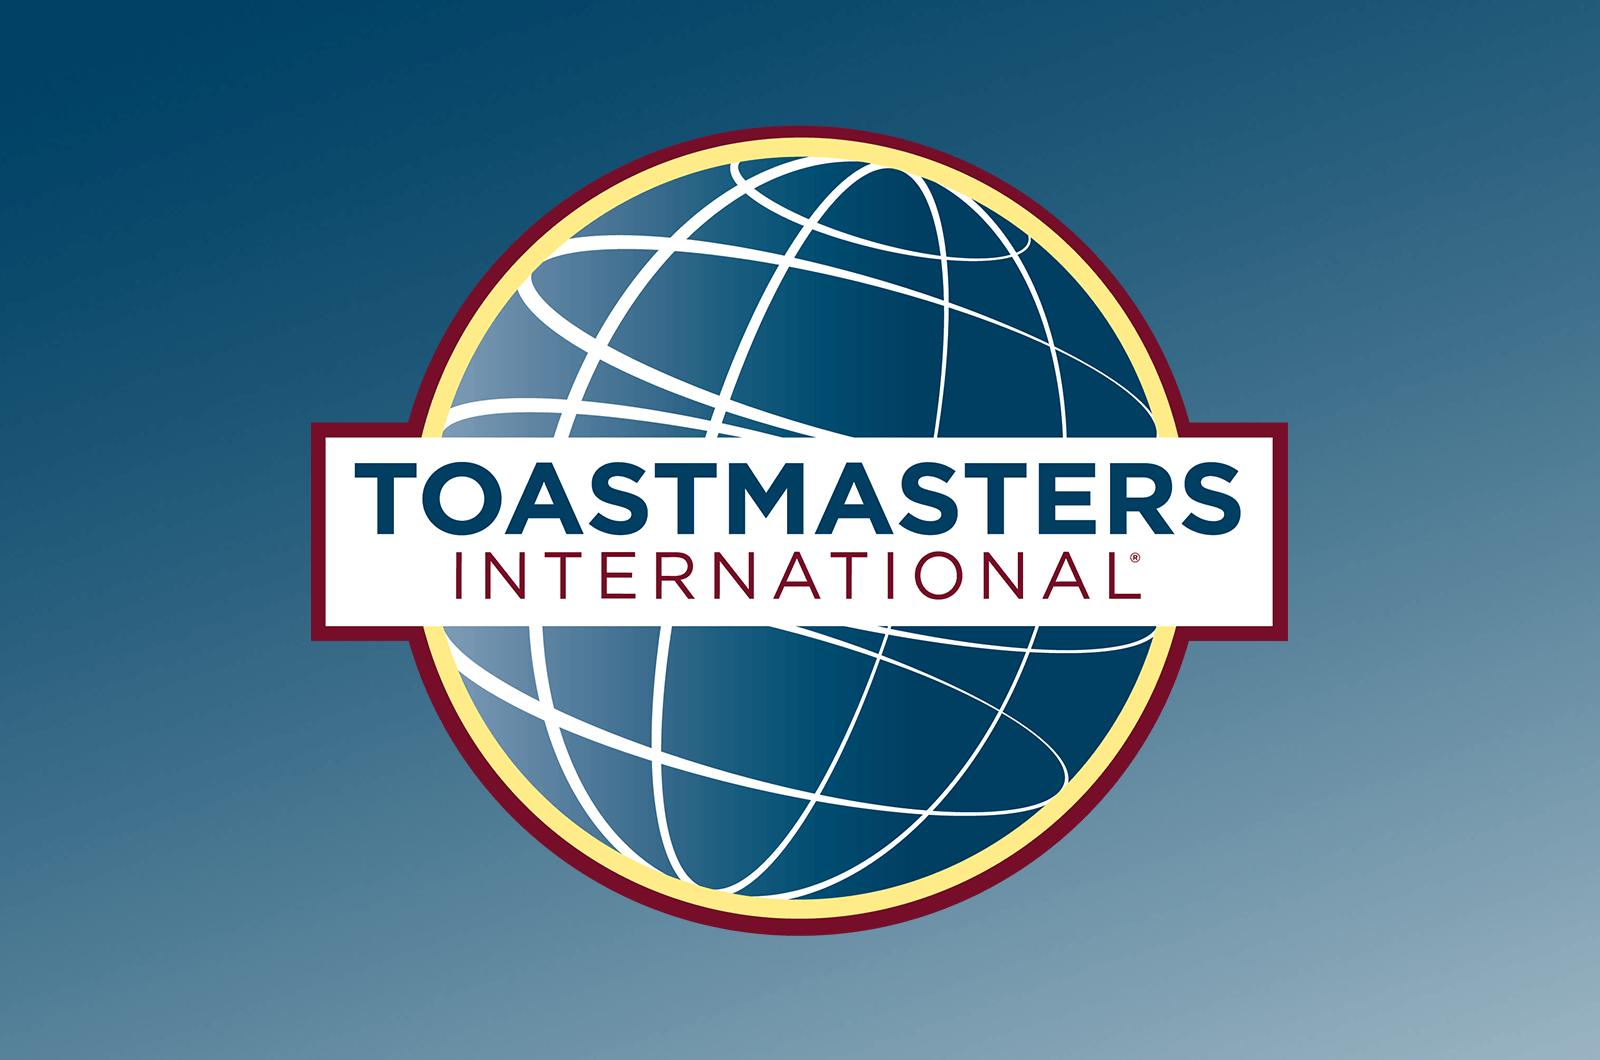 Toastmasters club resumes in-person meetings at new location in Hudson